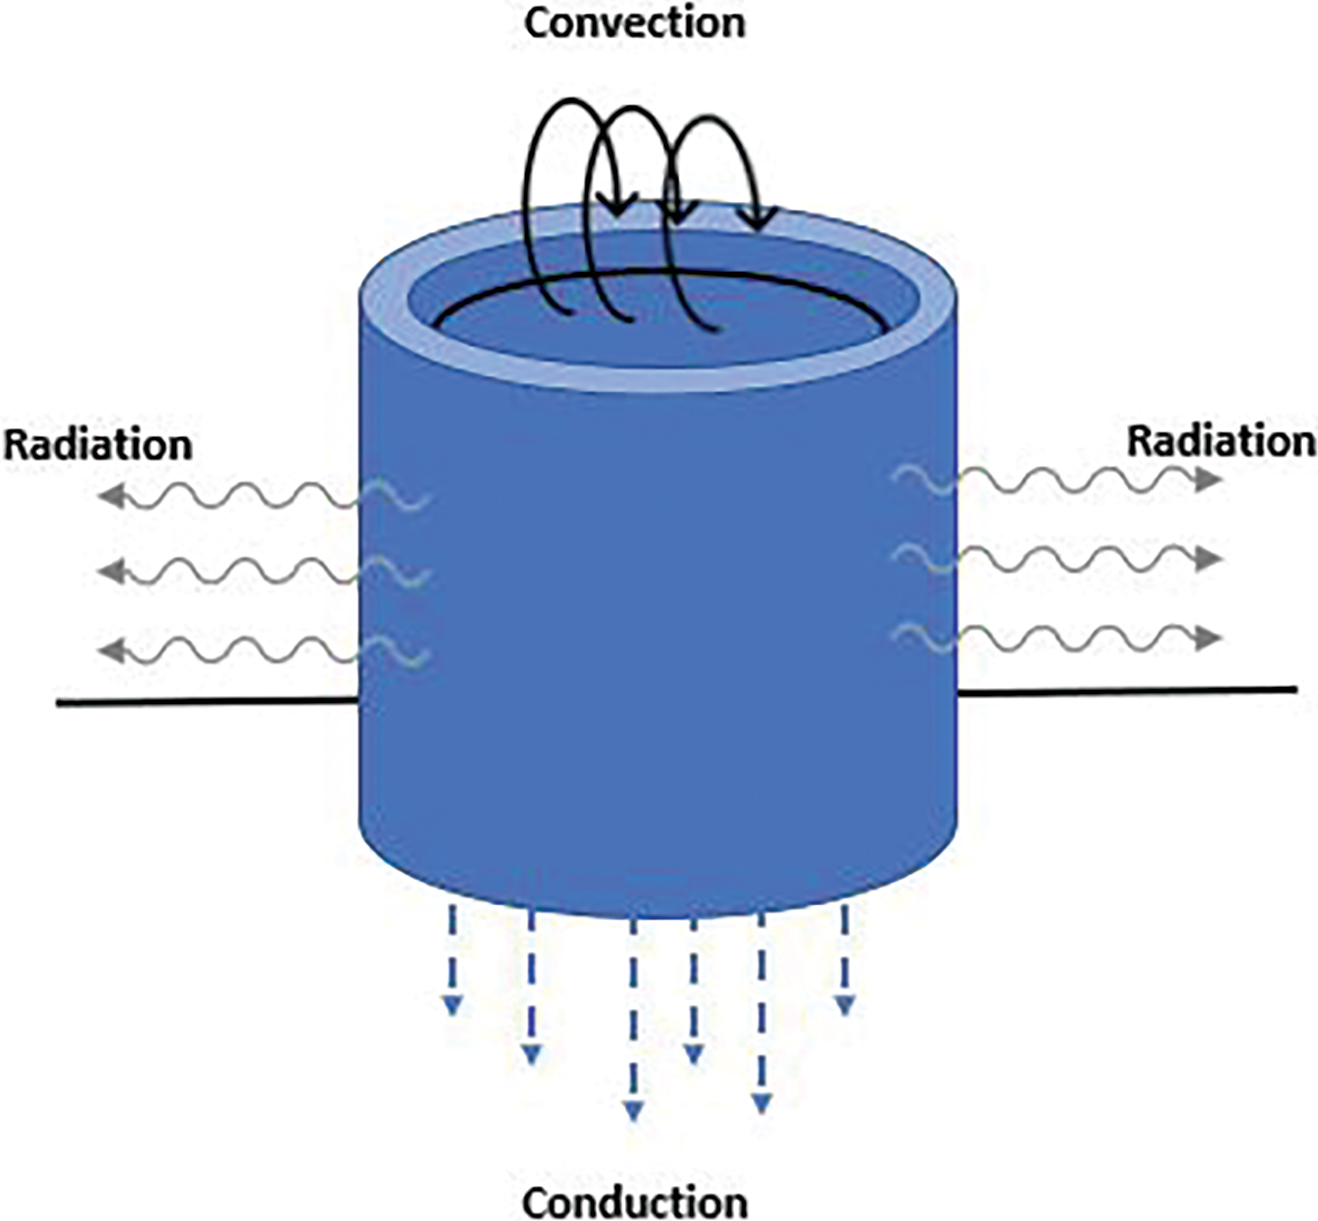 Convection, radiation, and conduction